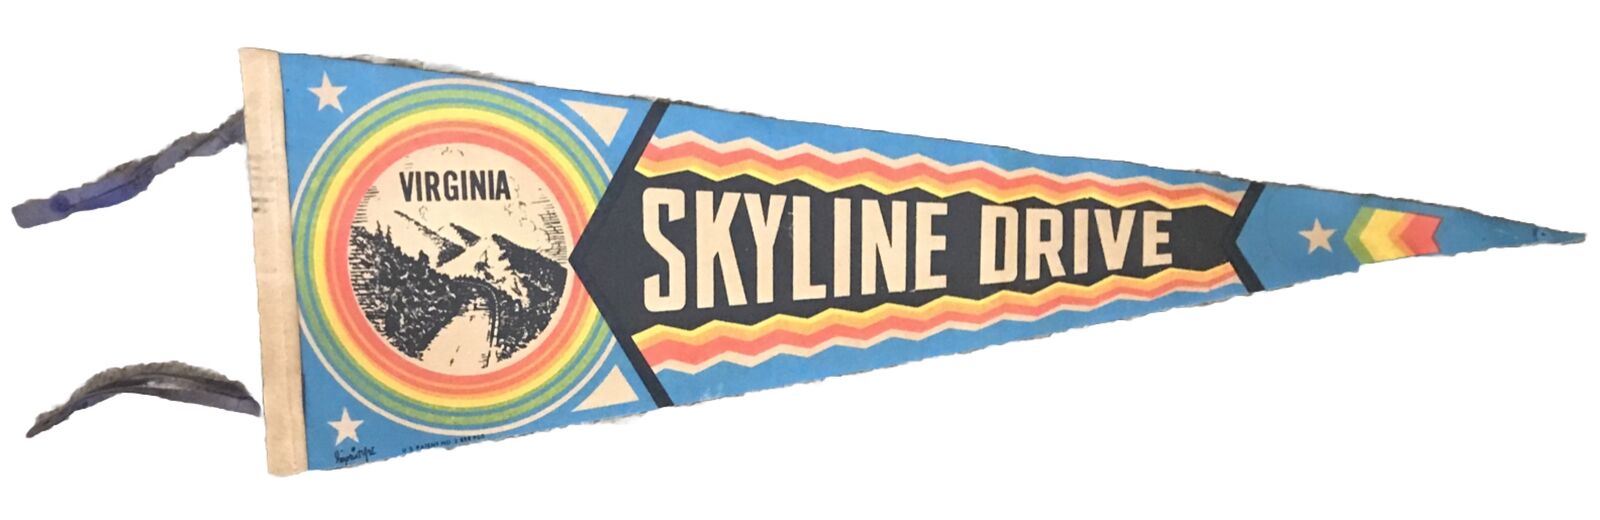 Vtg Skyline Drive Virginia Graphic Colorful Blue Orange Red White Pennant 25x8